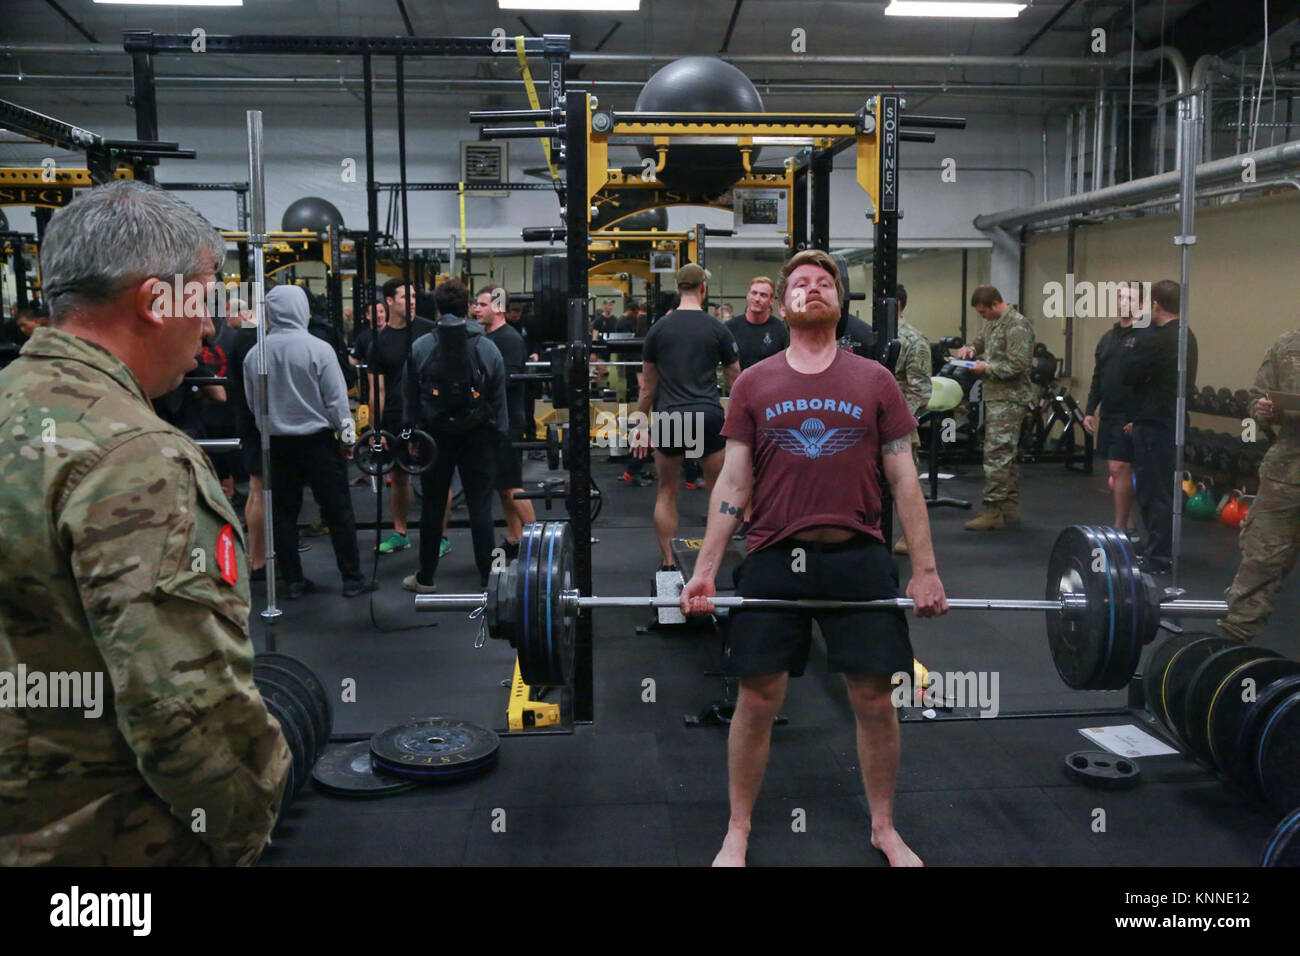 Members of the Canadian Special Operations Regiment (CSOR) participate in a lifting competition challenge during Menton week at Joint base Lewis-McChord, WA on December 5, 2017. Menton week celebrates the 1st Special Forces Group heritage, as its predecessor was the First Special Service Force, which disbanded in Menton, France at the end of World War II on Dec. 5, 1944. The unit, commonly referred to as the "Devils Brigade," is credited with a distinguished record of unconventional operations behind enemy lines. (US ARMY Stock Photo